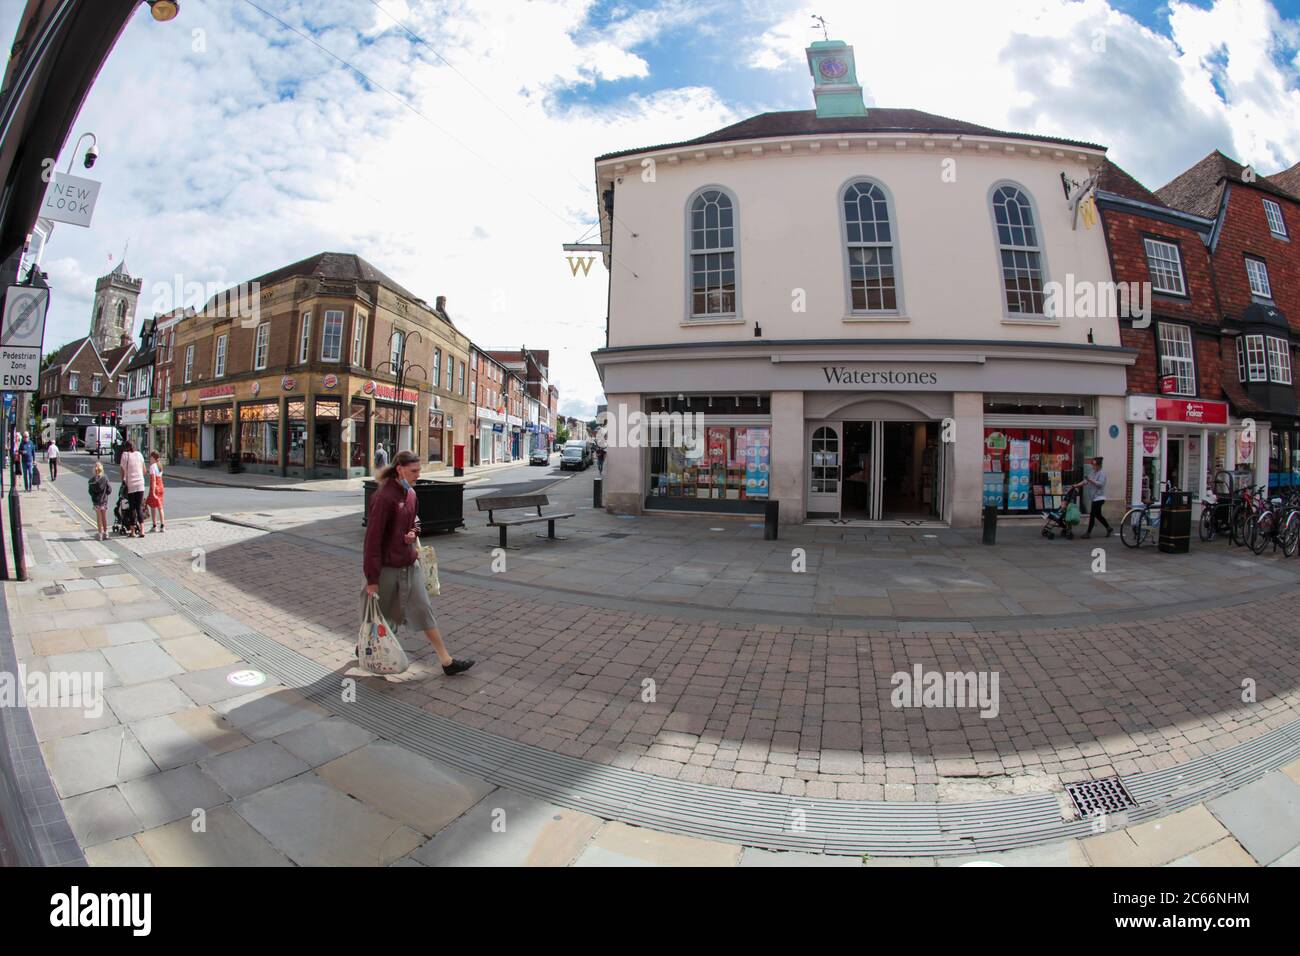 Waterstones bookshop in the High Street Salisbury Wiltshire UK. Businesses slowly starting again after the easing of lockdown restrictions. July 2020. Stock Photo